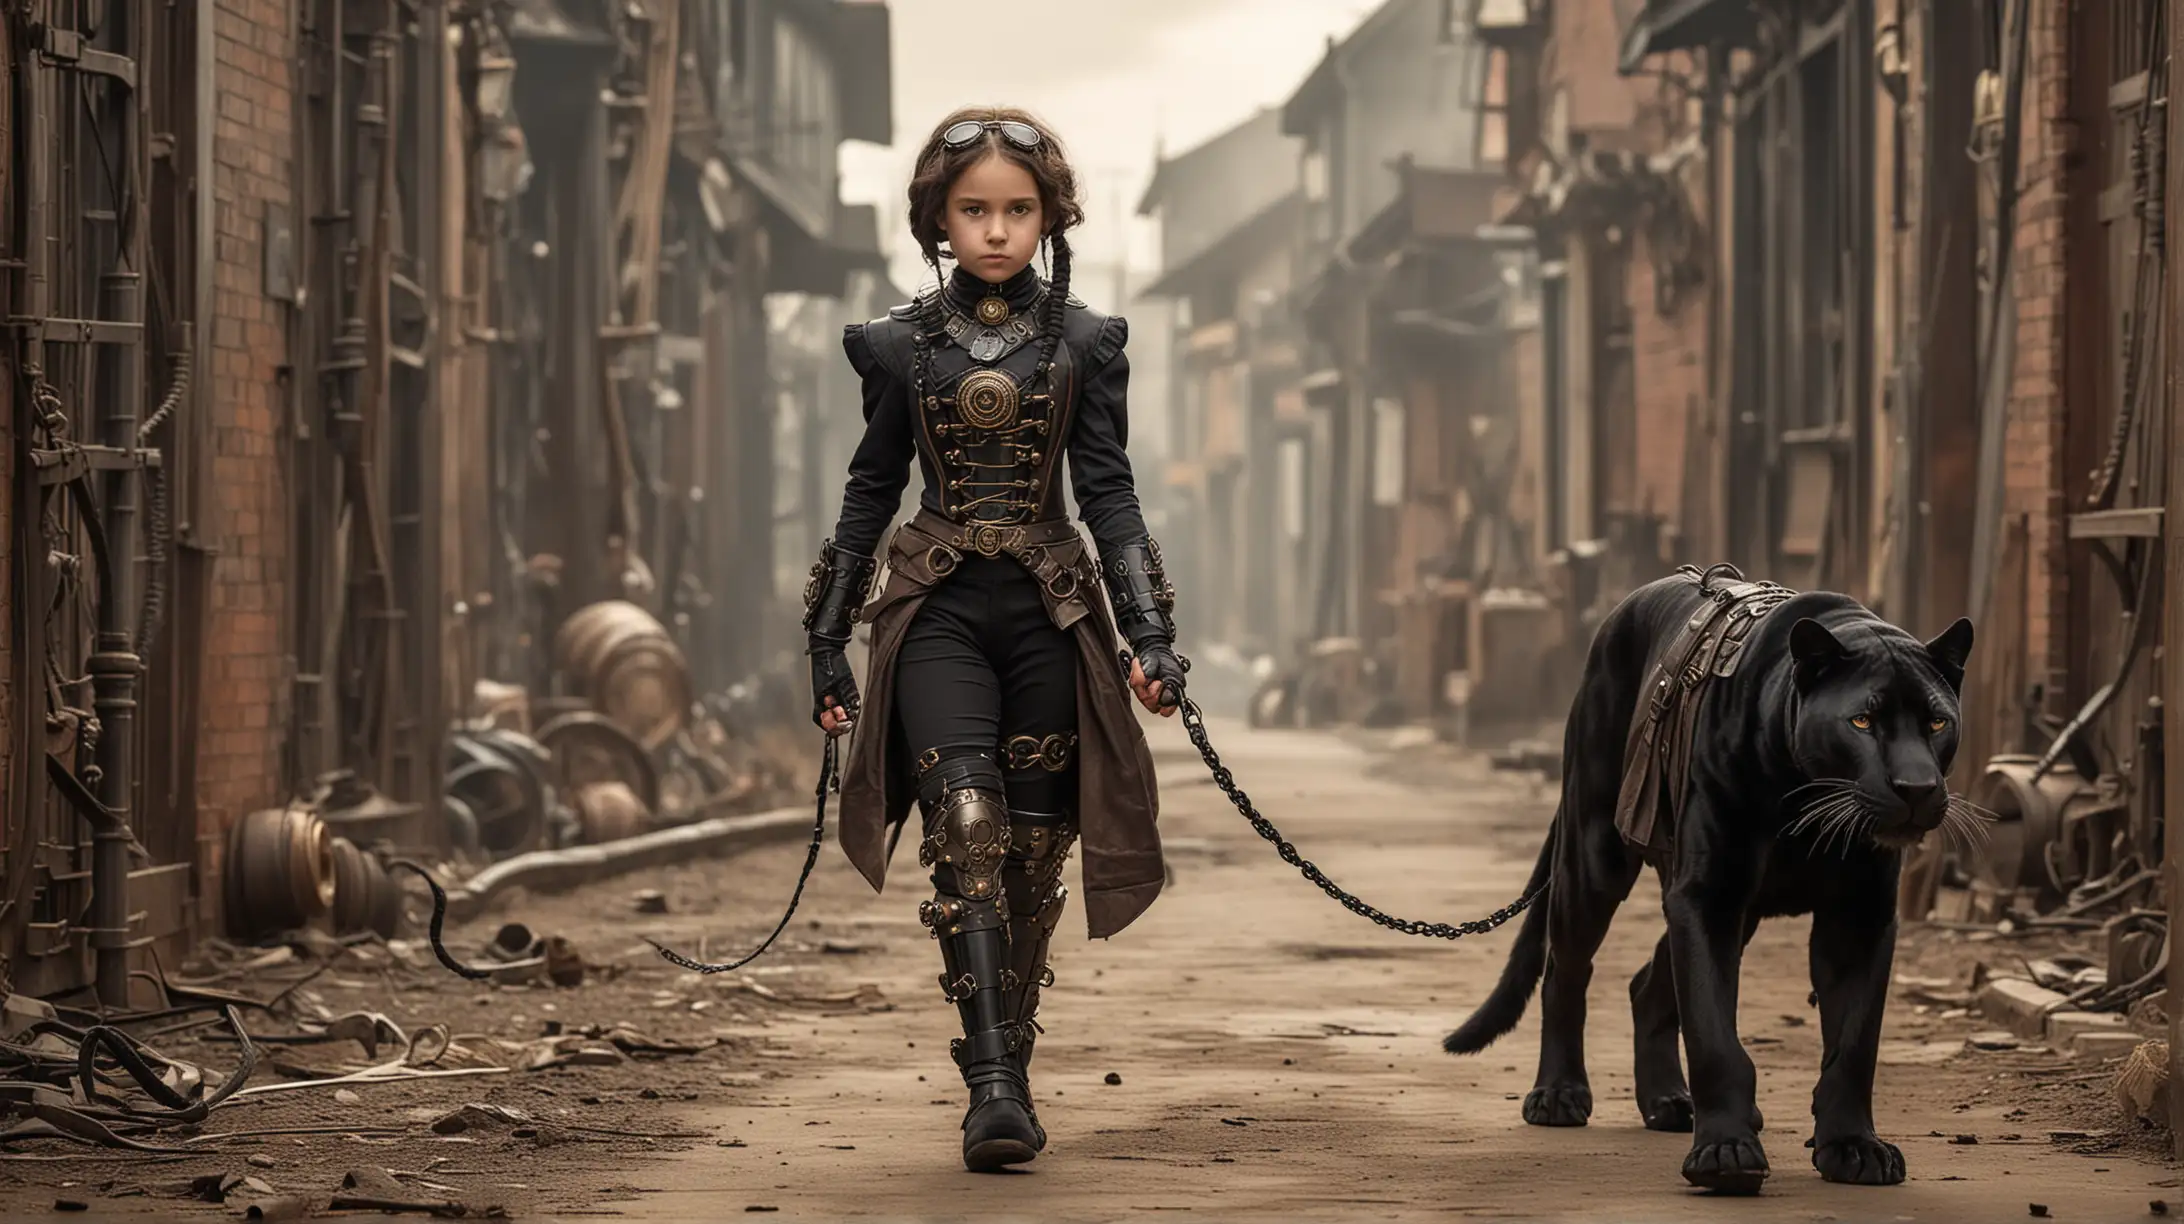 the eight-year-old steampunk girl walks with a leashed black panther in a steampunk collar